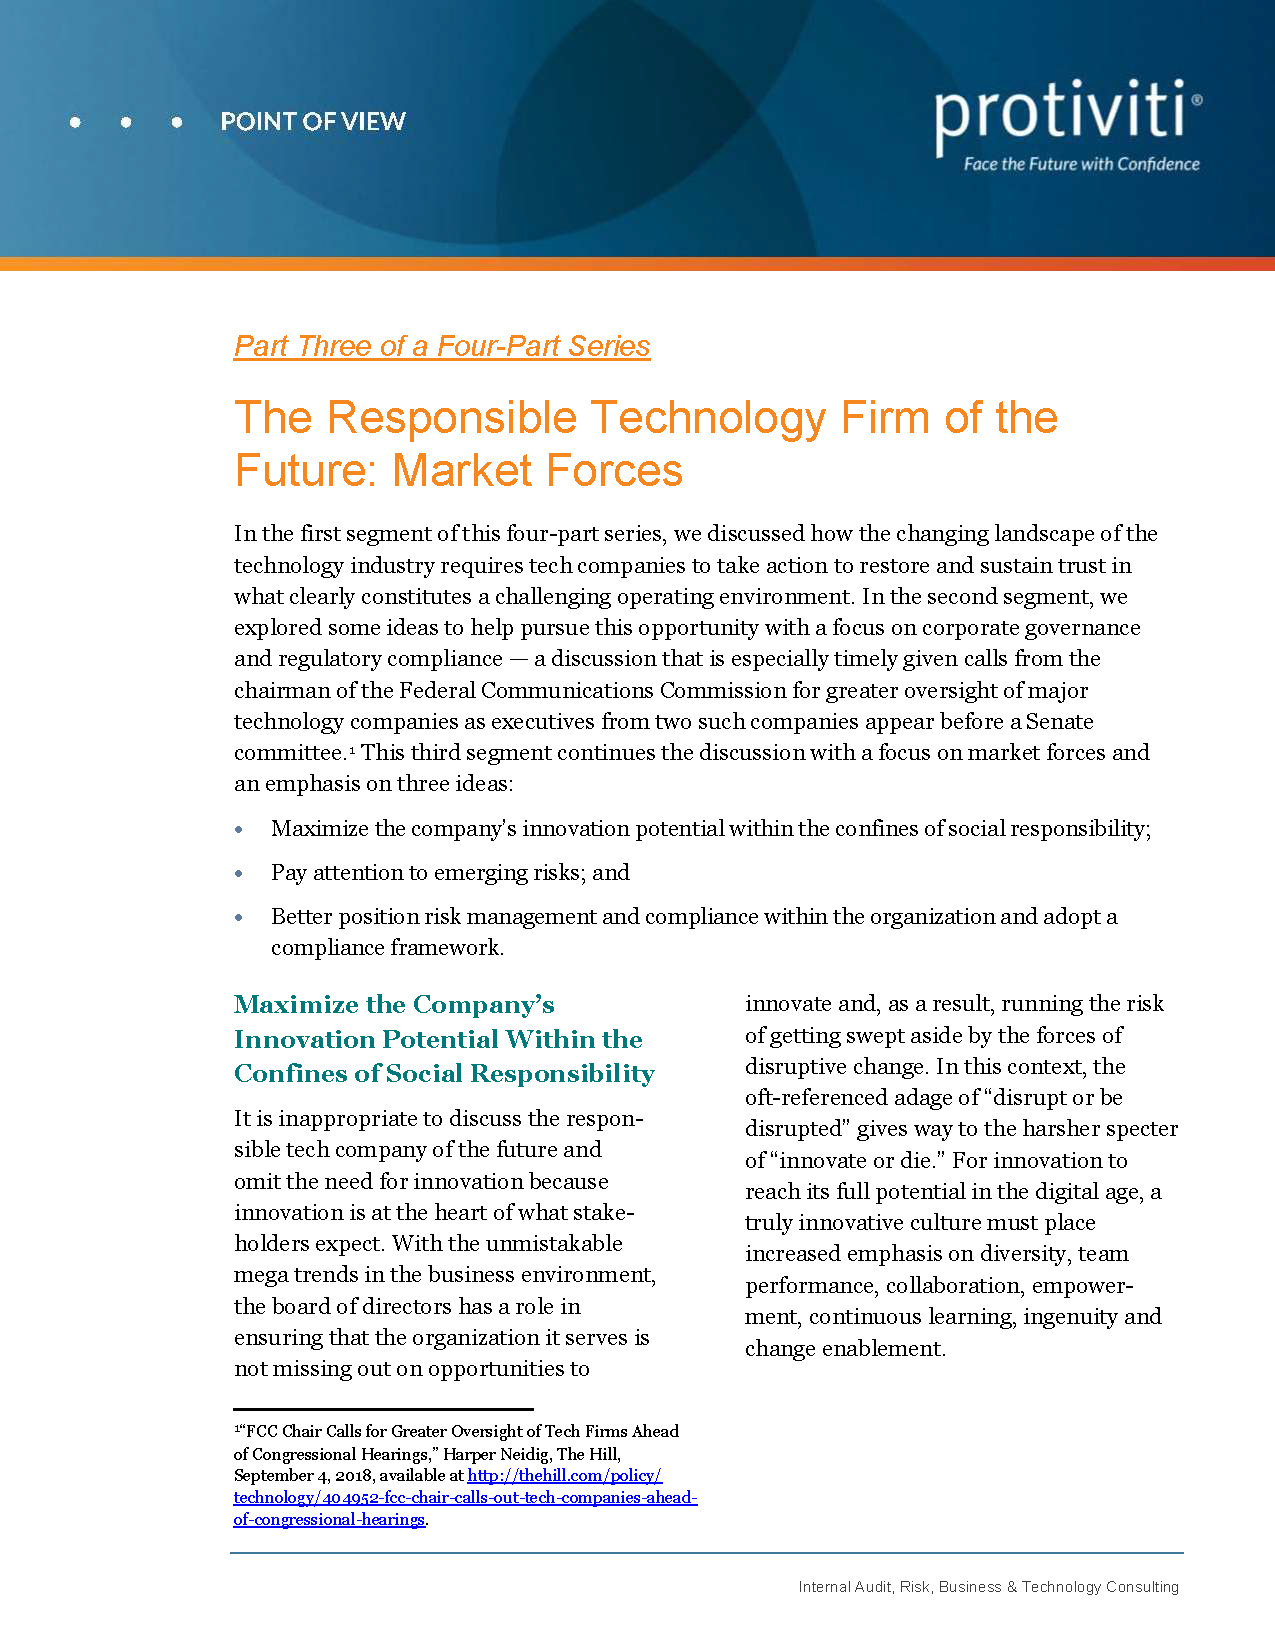 Screenshot of the first page of The Responsible Technology Firm of the Future Market Forces